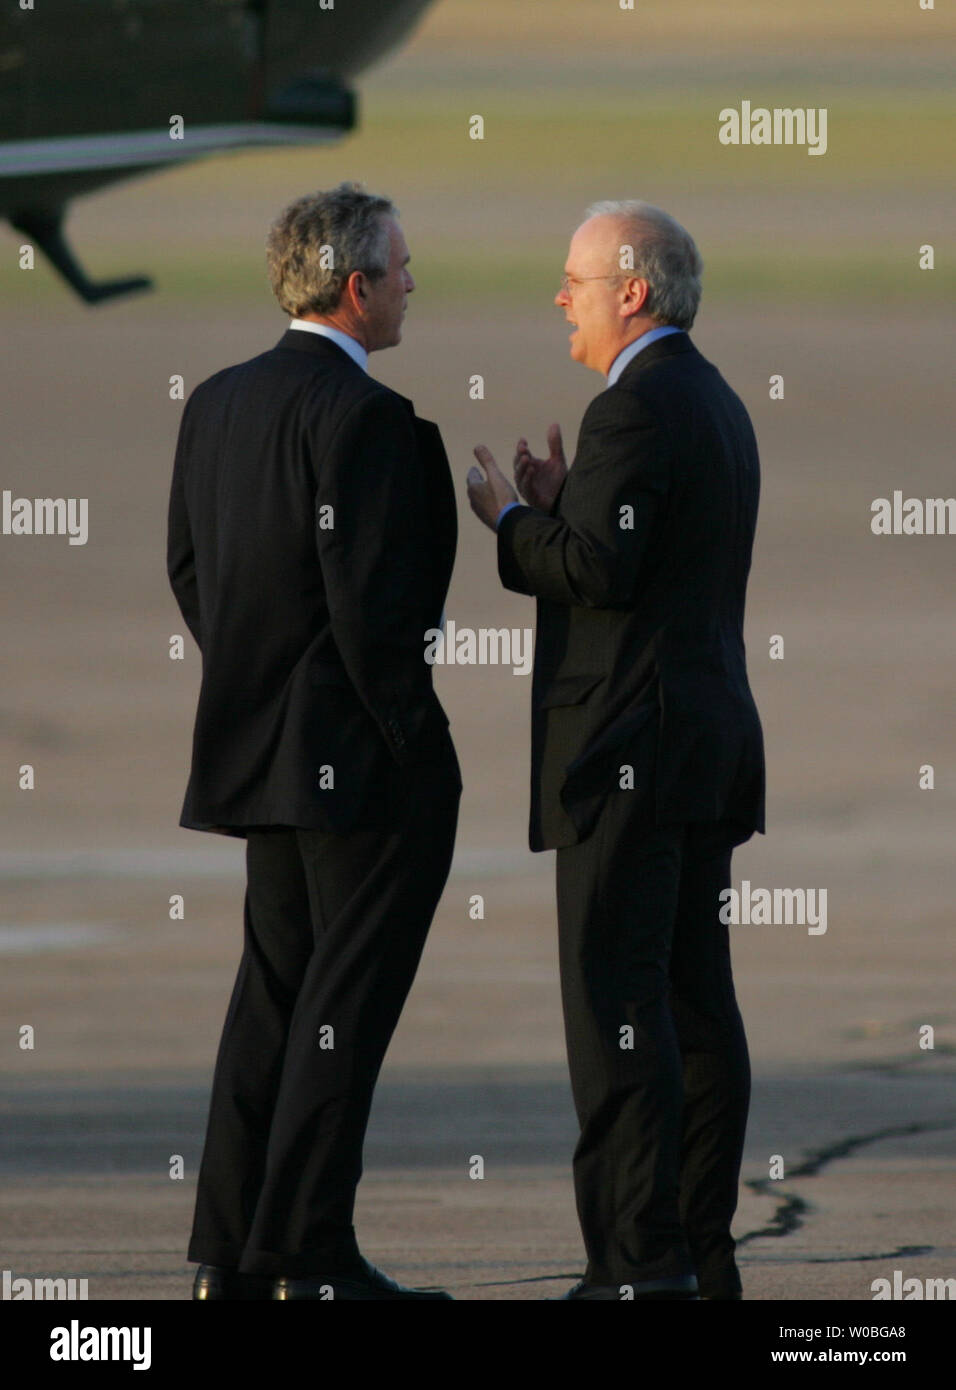 President George W. Bush arrives in Waco, Texas to spend the Father's Day weekend at his ranch in Crawford, Texas on June 16, 2006. The President and his senior adviser Carl Rove discuss issues while waiting for the arrival of First Lady Laura Bush. (UPI Photo/Ron Russek II) Stock Photo